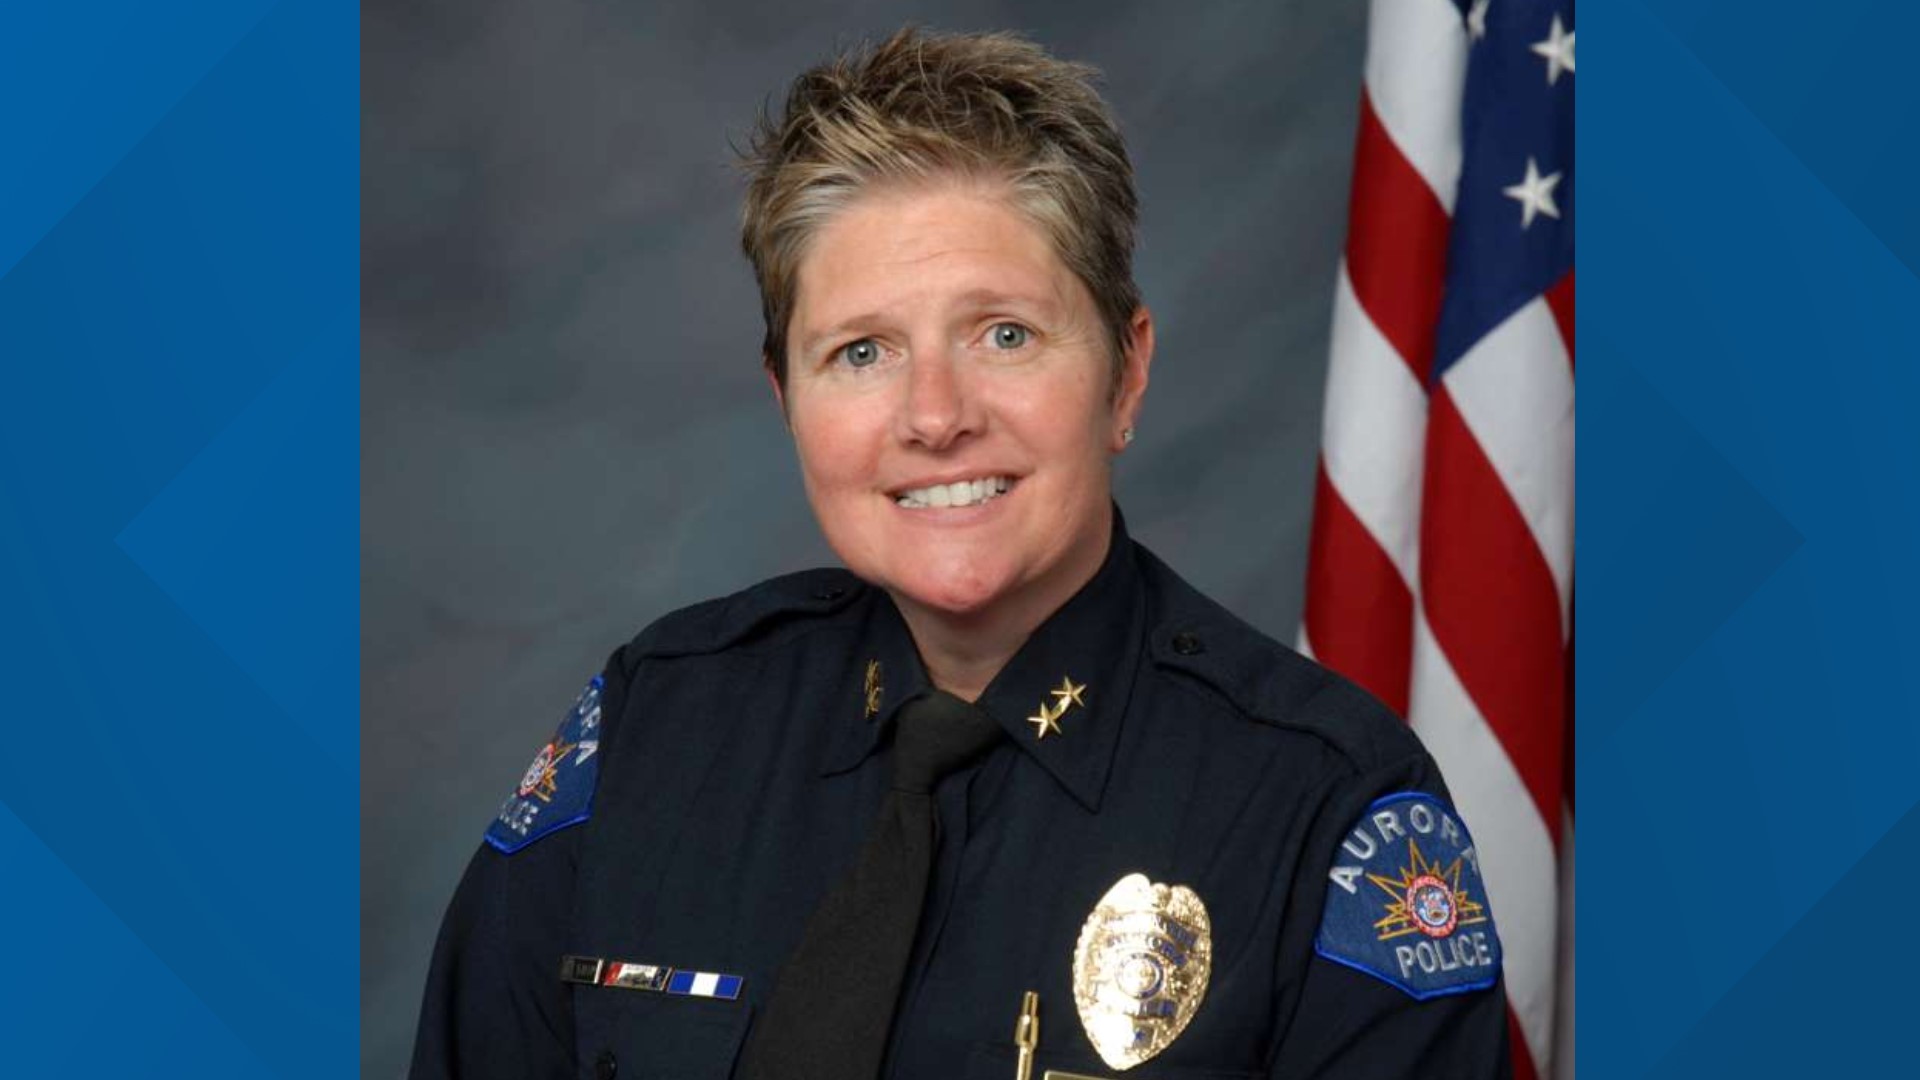 Aurora City Council voted to approve the appointment of Vanessa Wilson as the new chief of the Aurora Police Department.